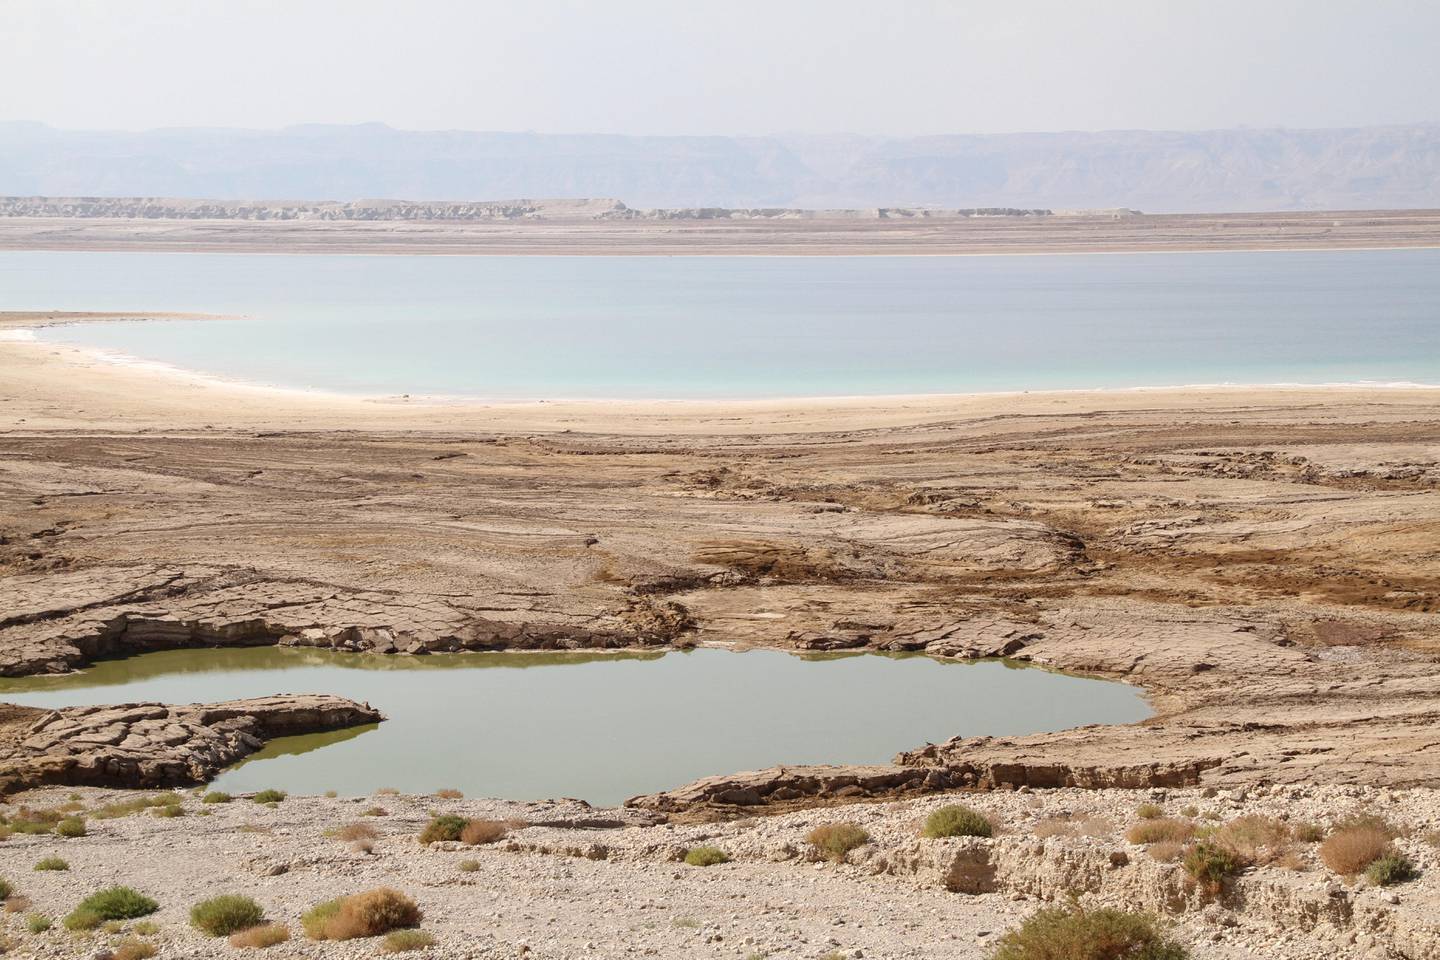 A large sinkhole on the shore of the Dead Sea. Its one of 300 sinkholes that have formed since the early 2000s within a 6 kilometre stretch. Sophie Tremblay for The National